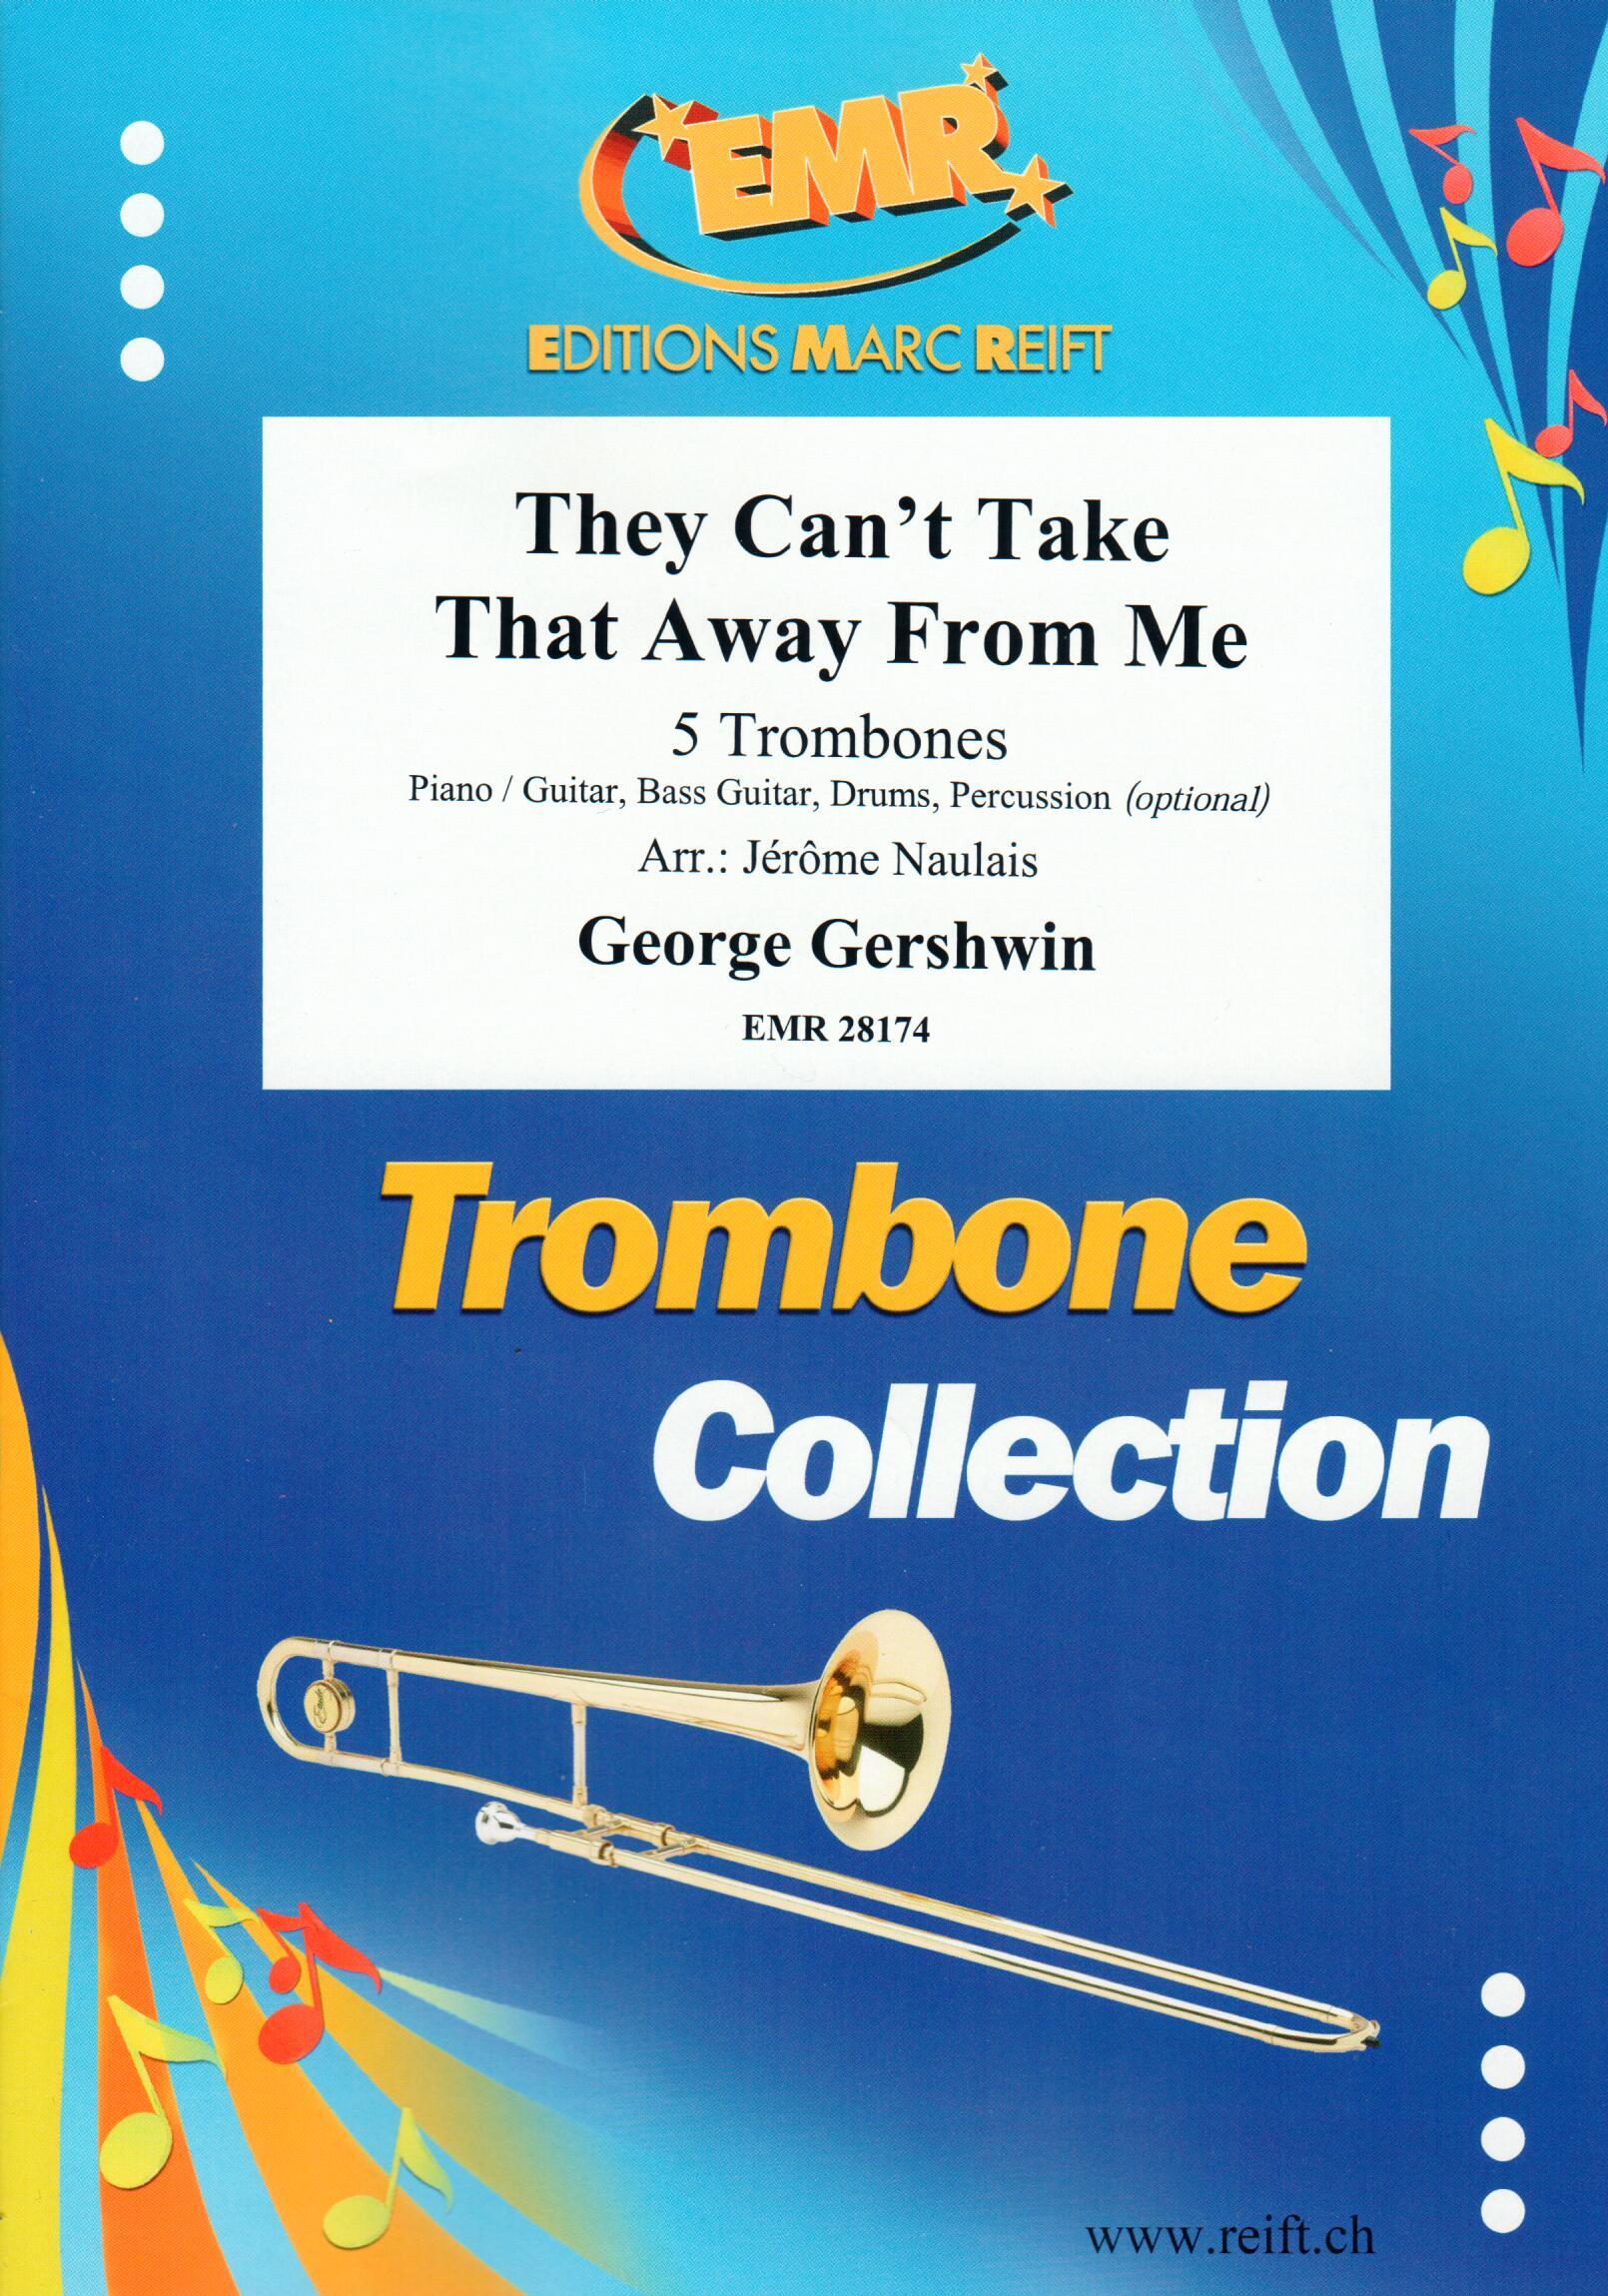 THEY CAN'T TAKE THAT AWAY FROM ME, SOLOS - Trombone